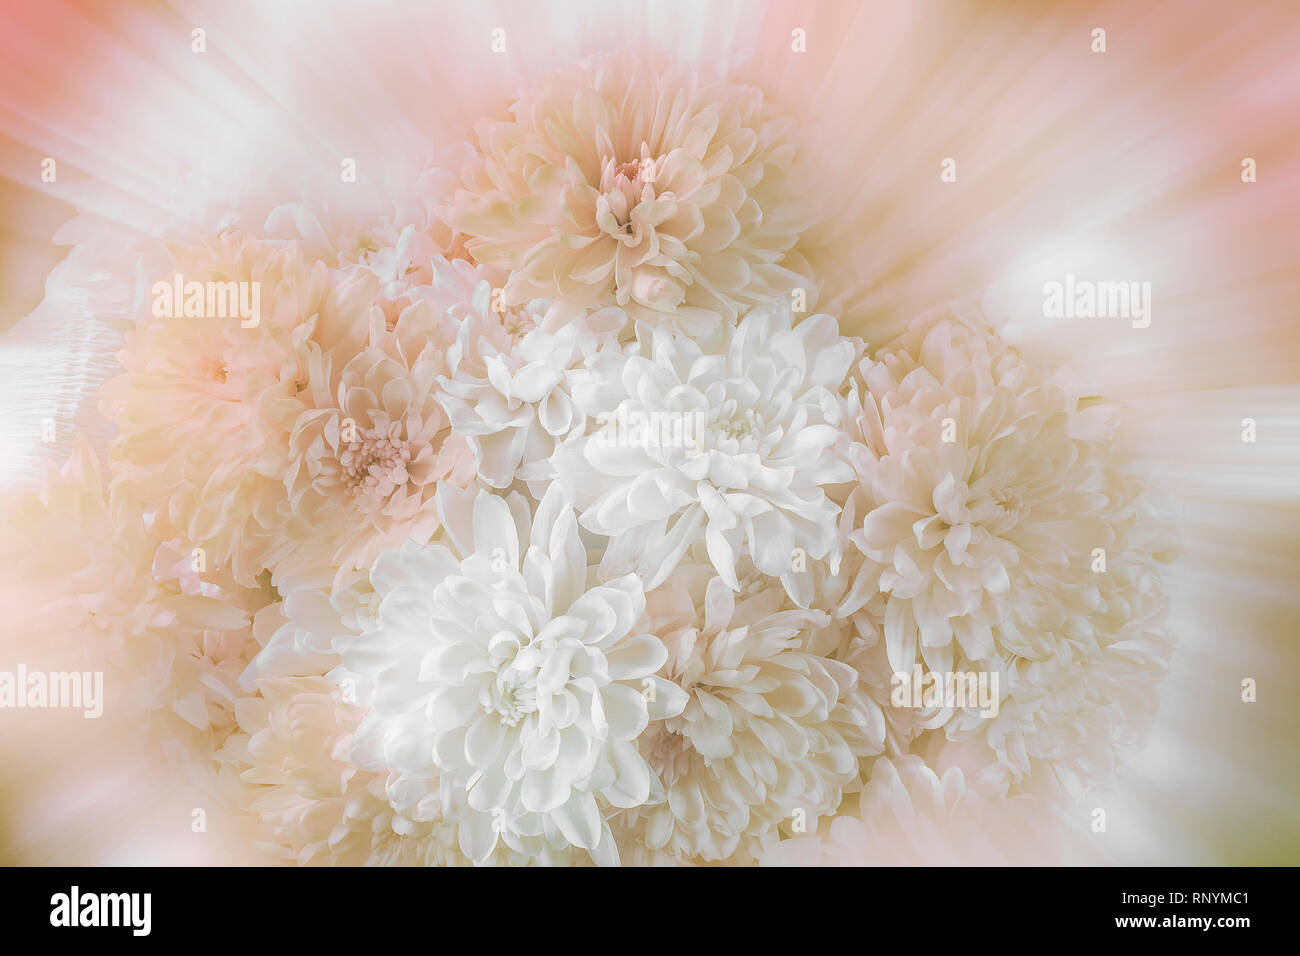 Vintage floral festive romantic artistic image of white and creamy colored chrysanthemums bouquet with soft selective focus on blurred background - te Stock Photo